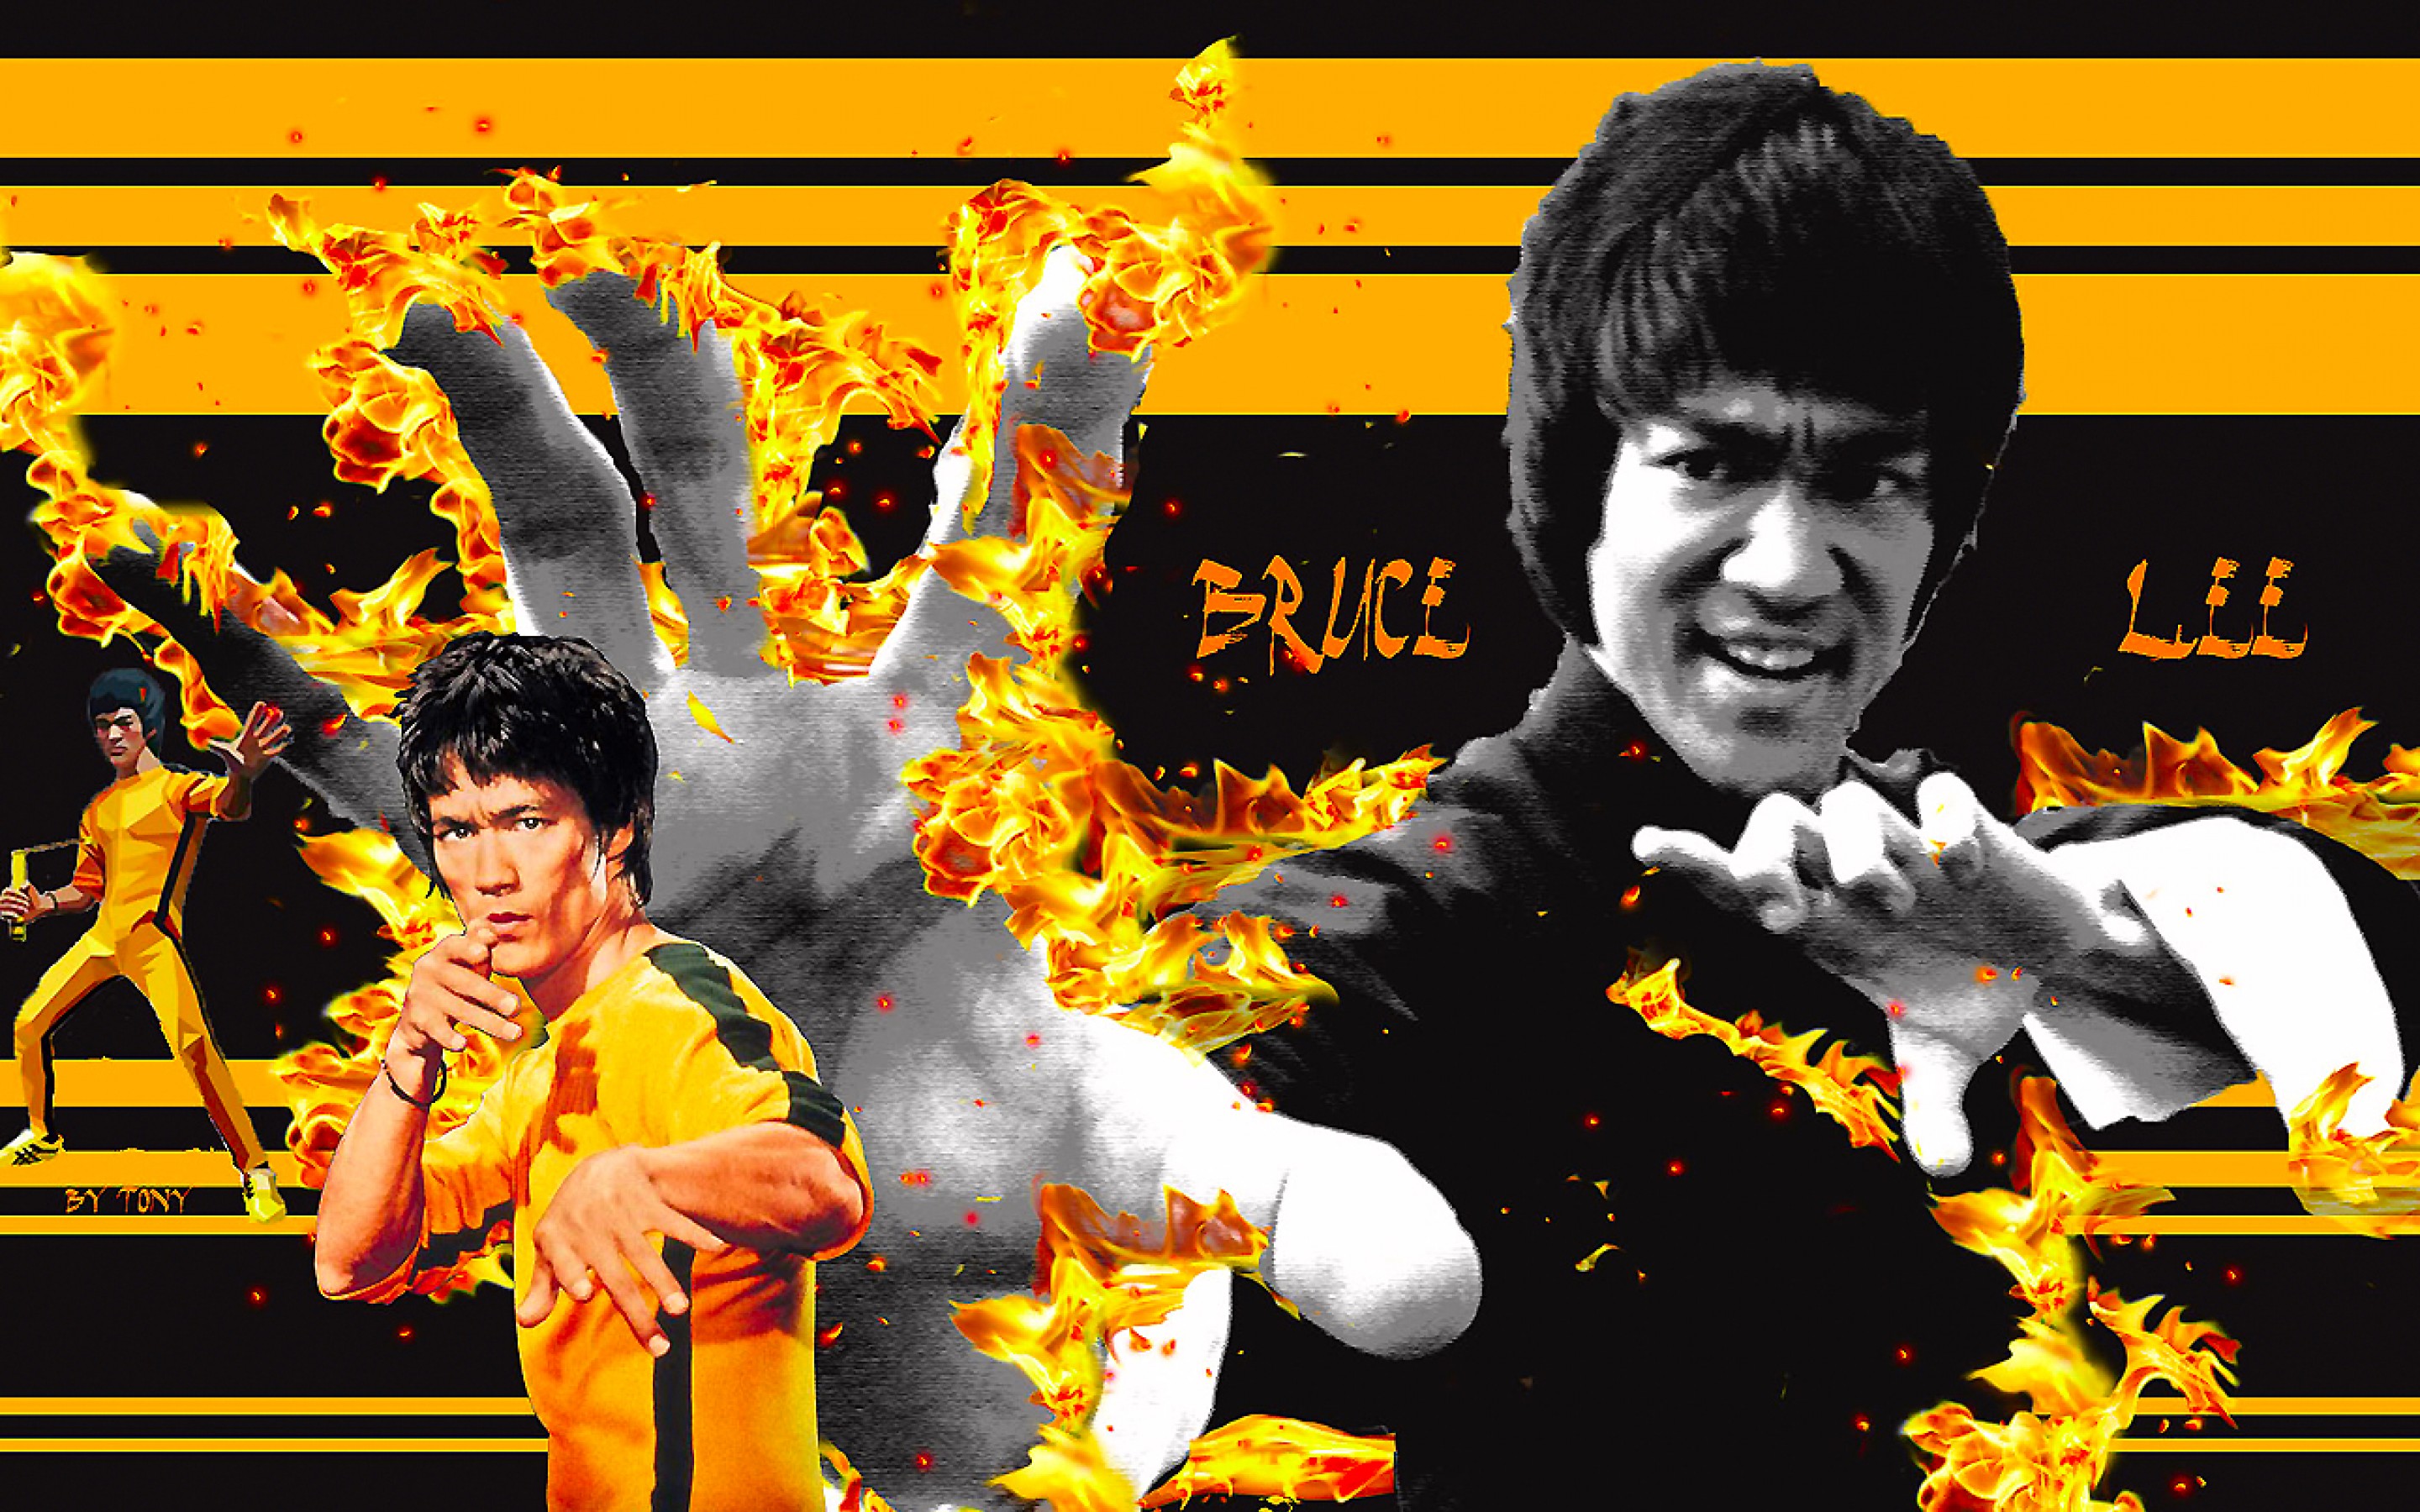 Bruce Lee Quotes 4k Wallpaper Gaming Pc | Quotes and ...